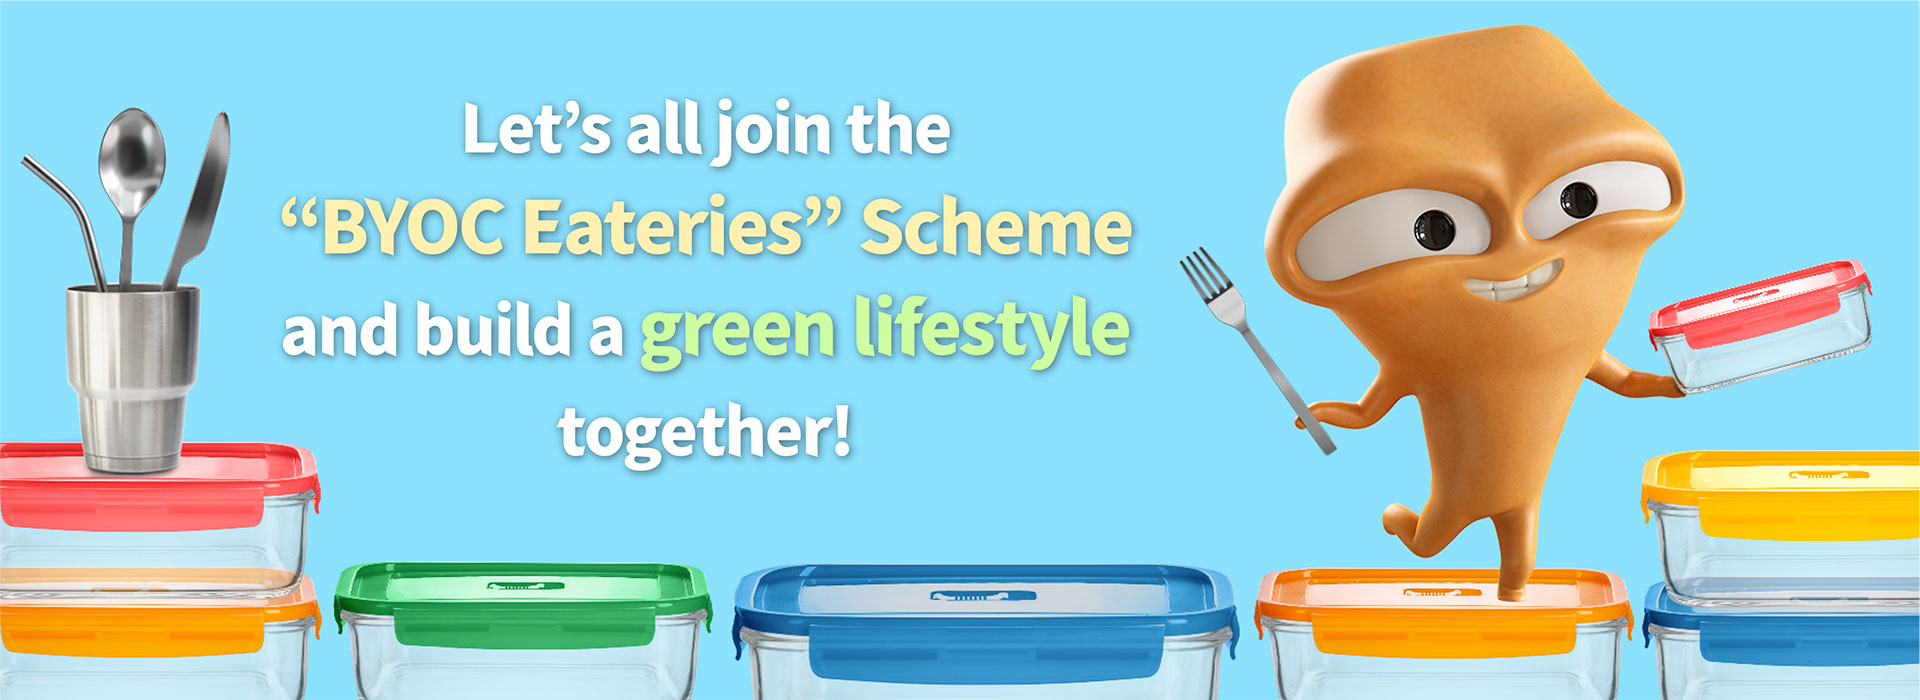 Let's all join the “BYOC Eateries” Scheme and build a green lifestyle together!